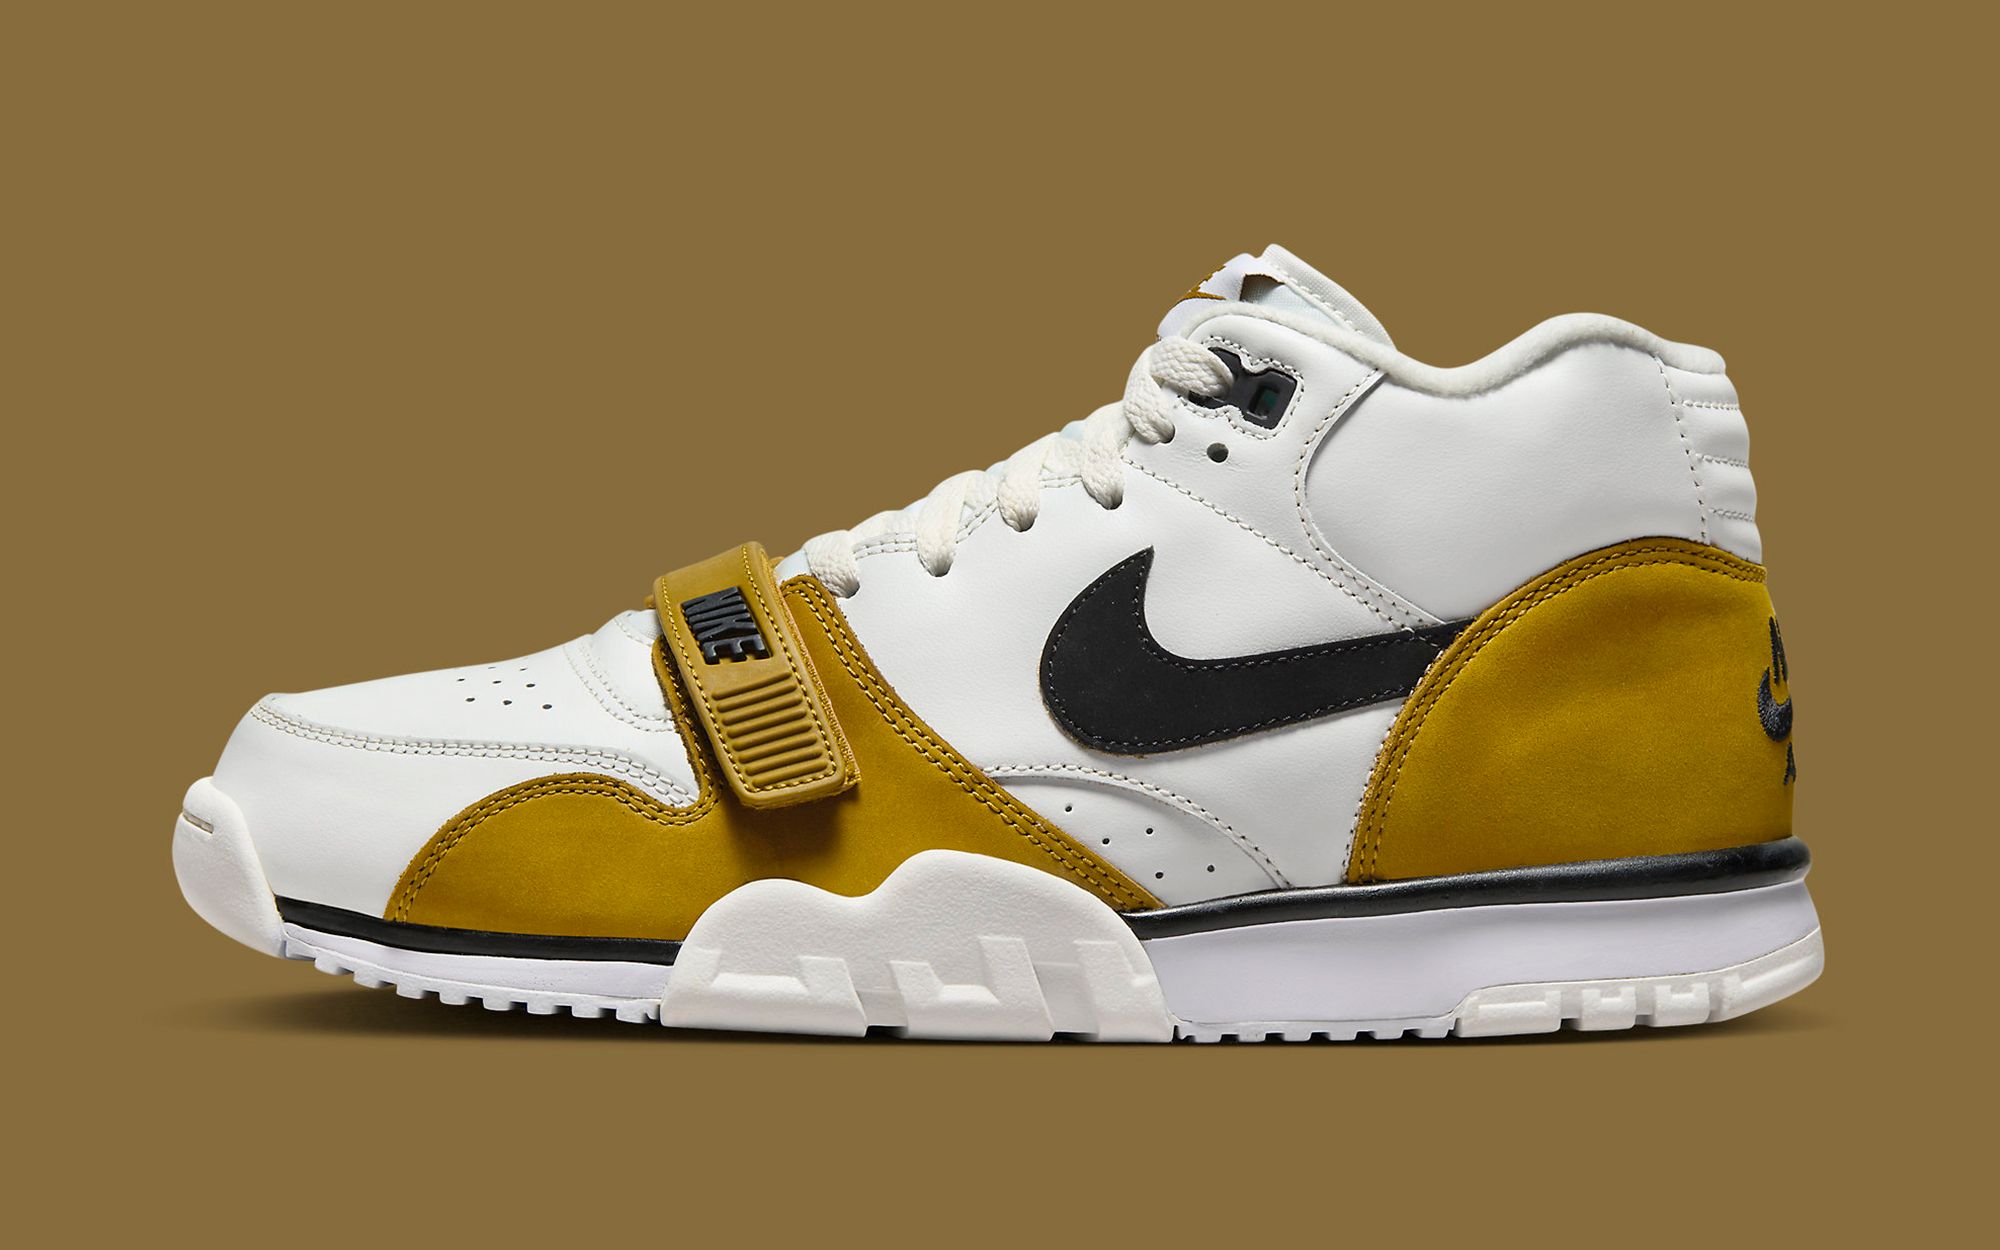 The Nike Air Trainer 1 Appears in White and Wheat for Fall | House